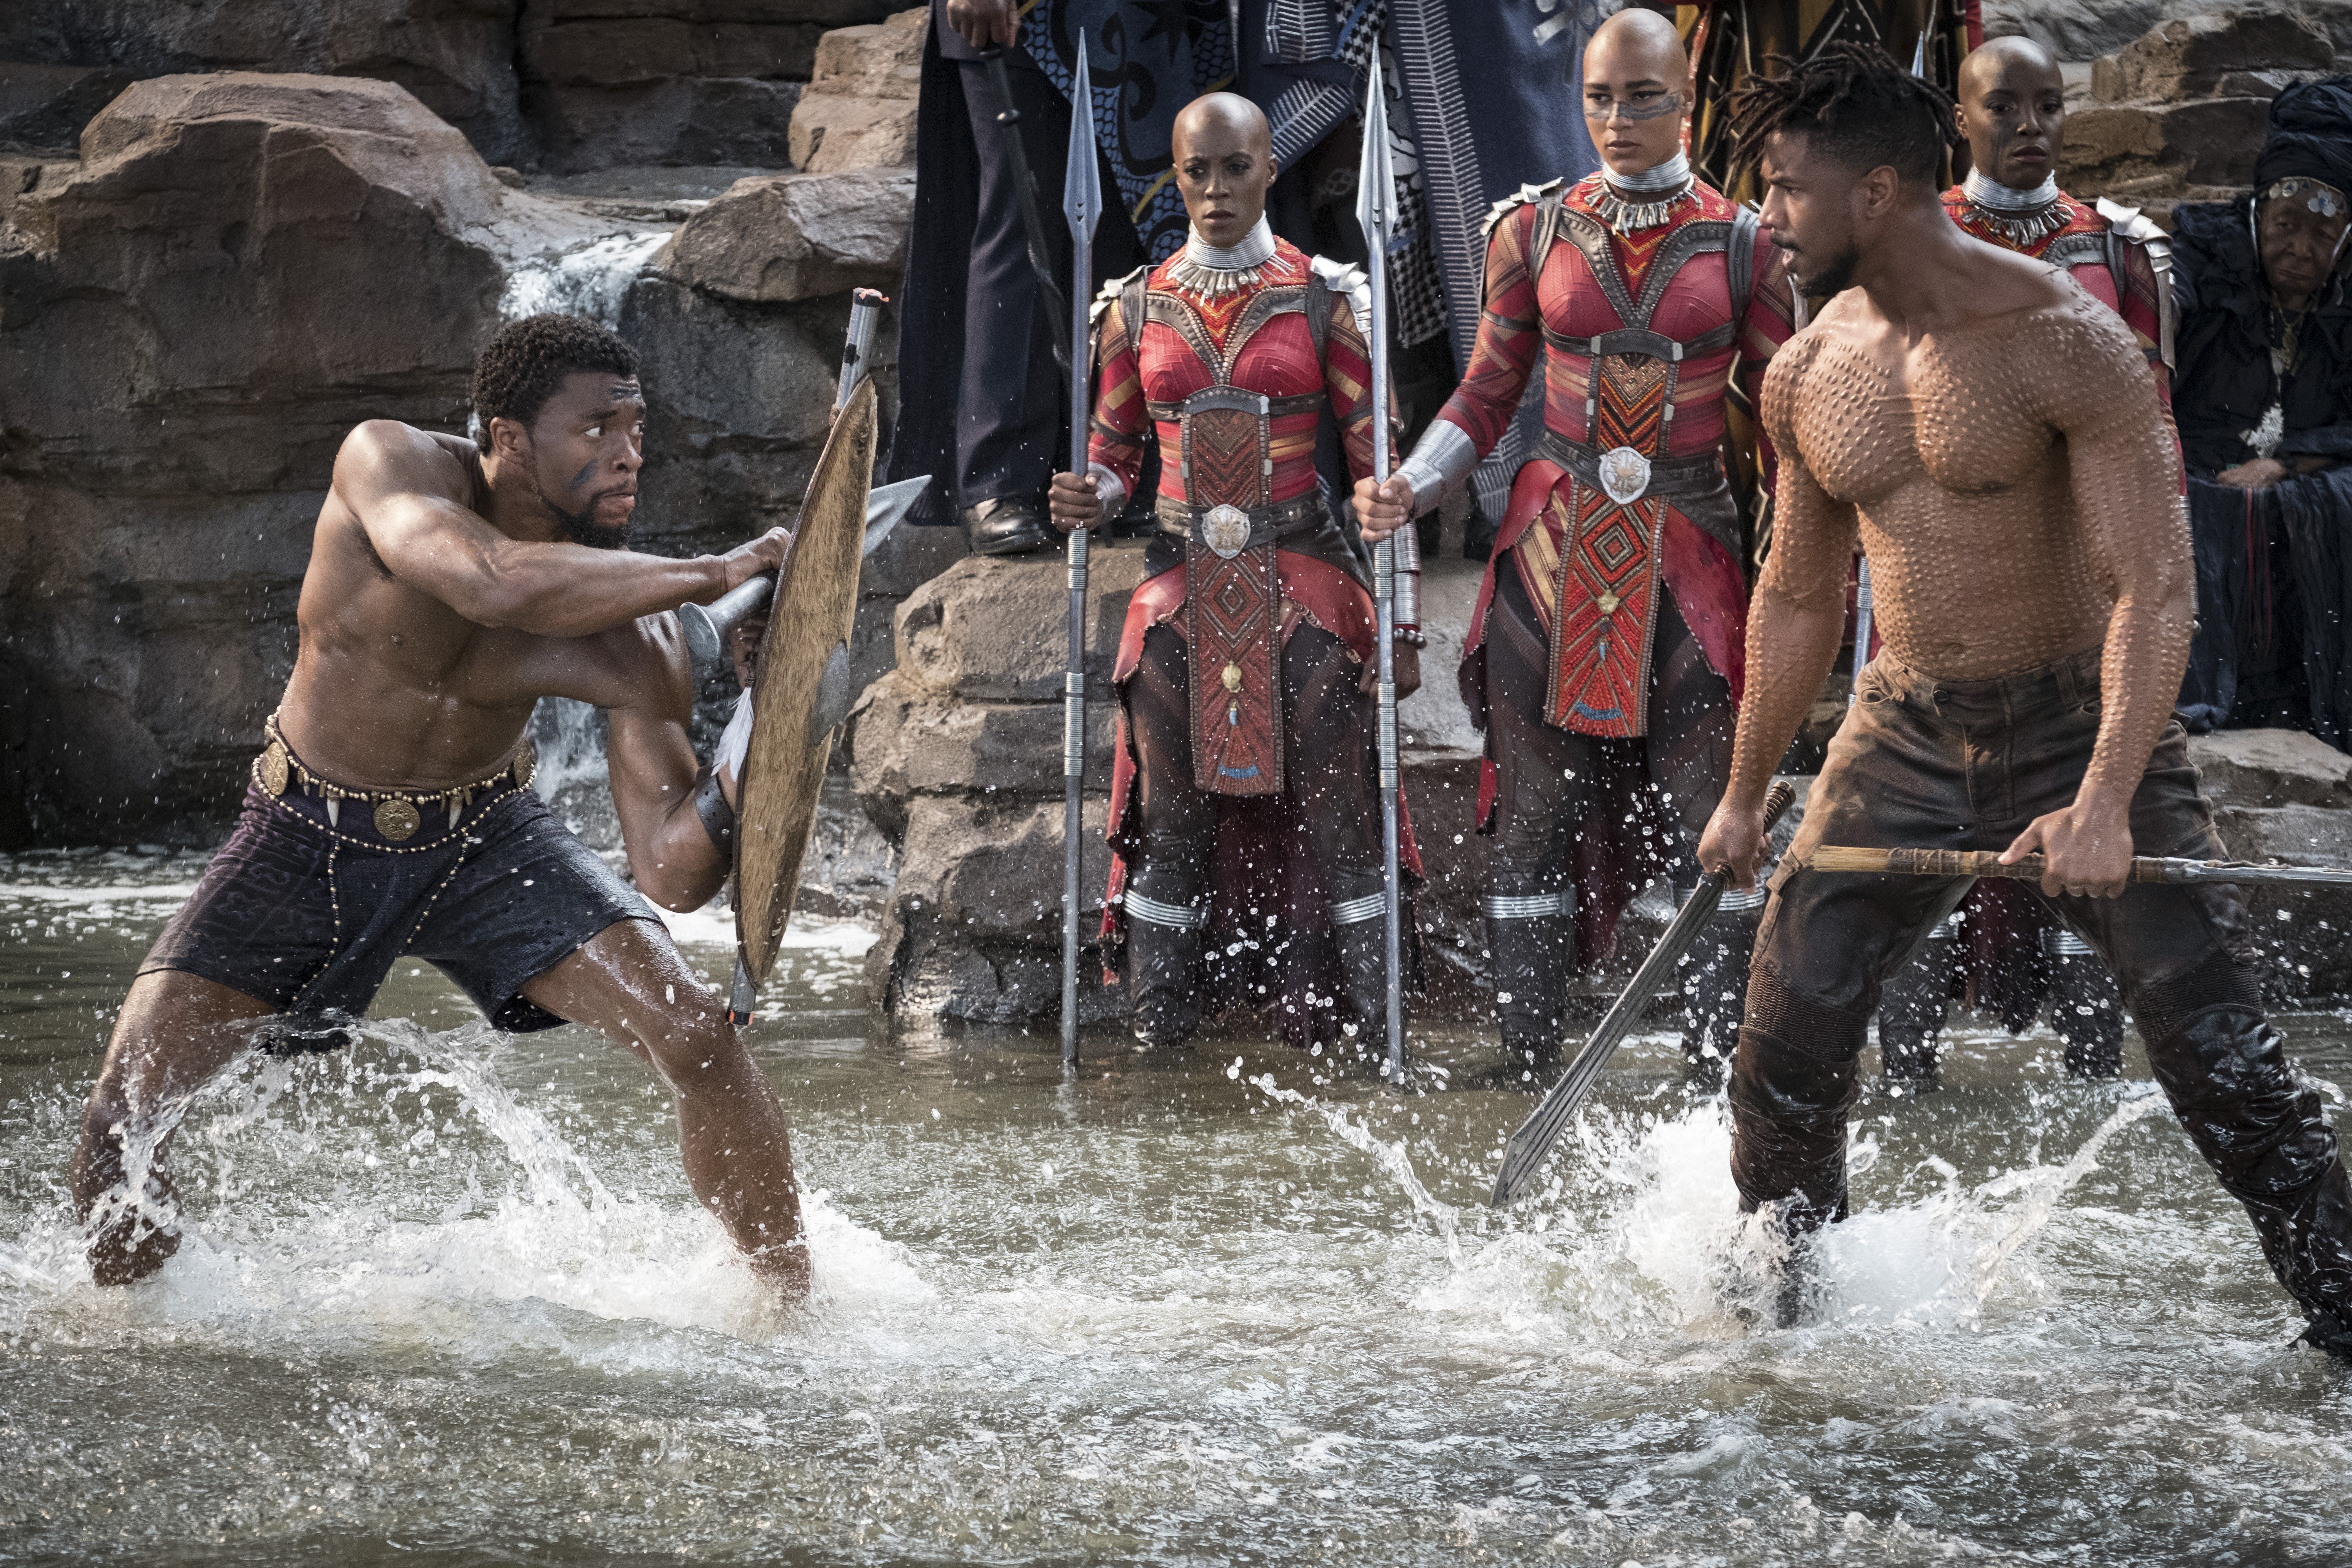 ‘Black Panther’ was the highest-grossing film at the US box office, with a domestic total of US$700,059,566. Pictured are Chadwick Boseman (left) as T’Challa, the Black Panther; and as Michael B Jordan (right) as Erik ‘Killmonger’ Stevens. Photo: Marvel Studio